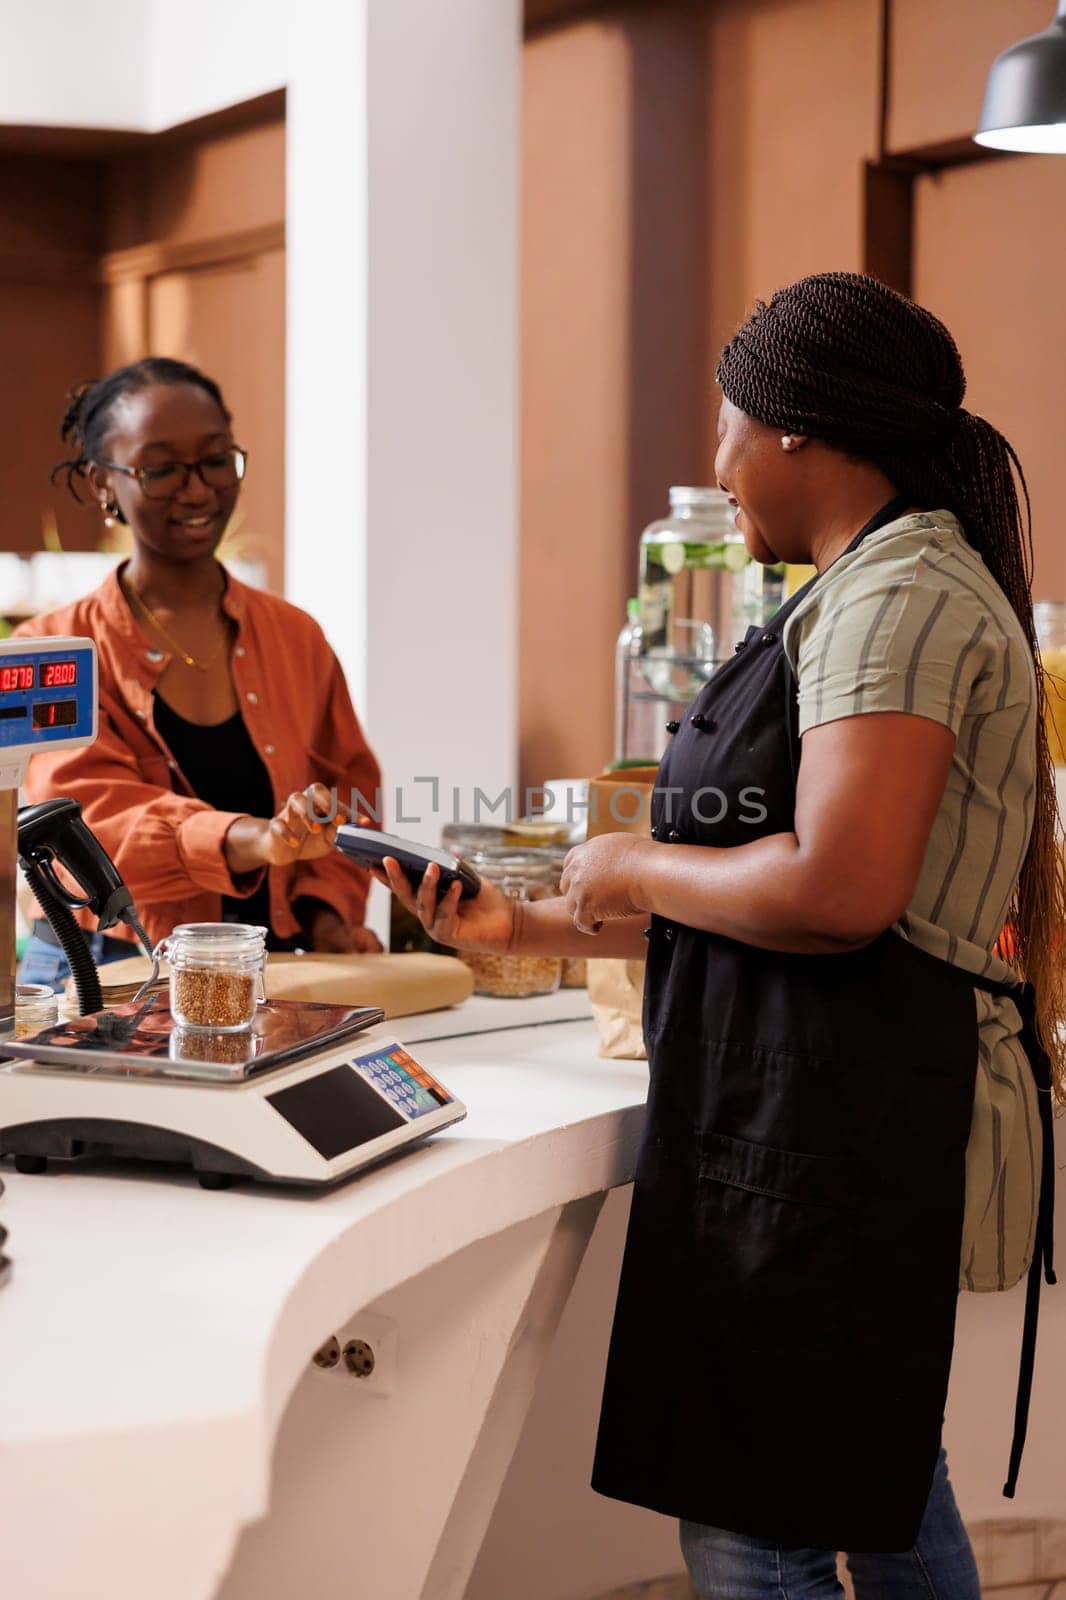 African American female client smiles while using her credit card for cashless payment. The local food market focuses on locally grown organic produce and eco friendly practices.